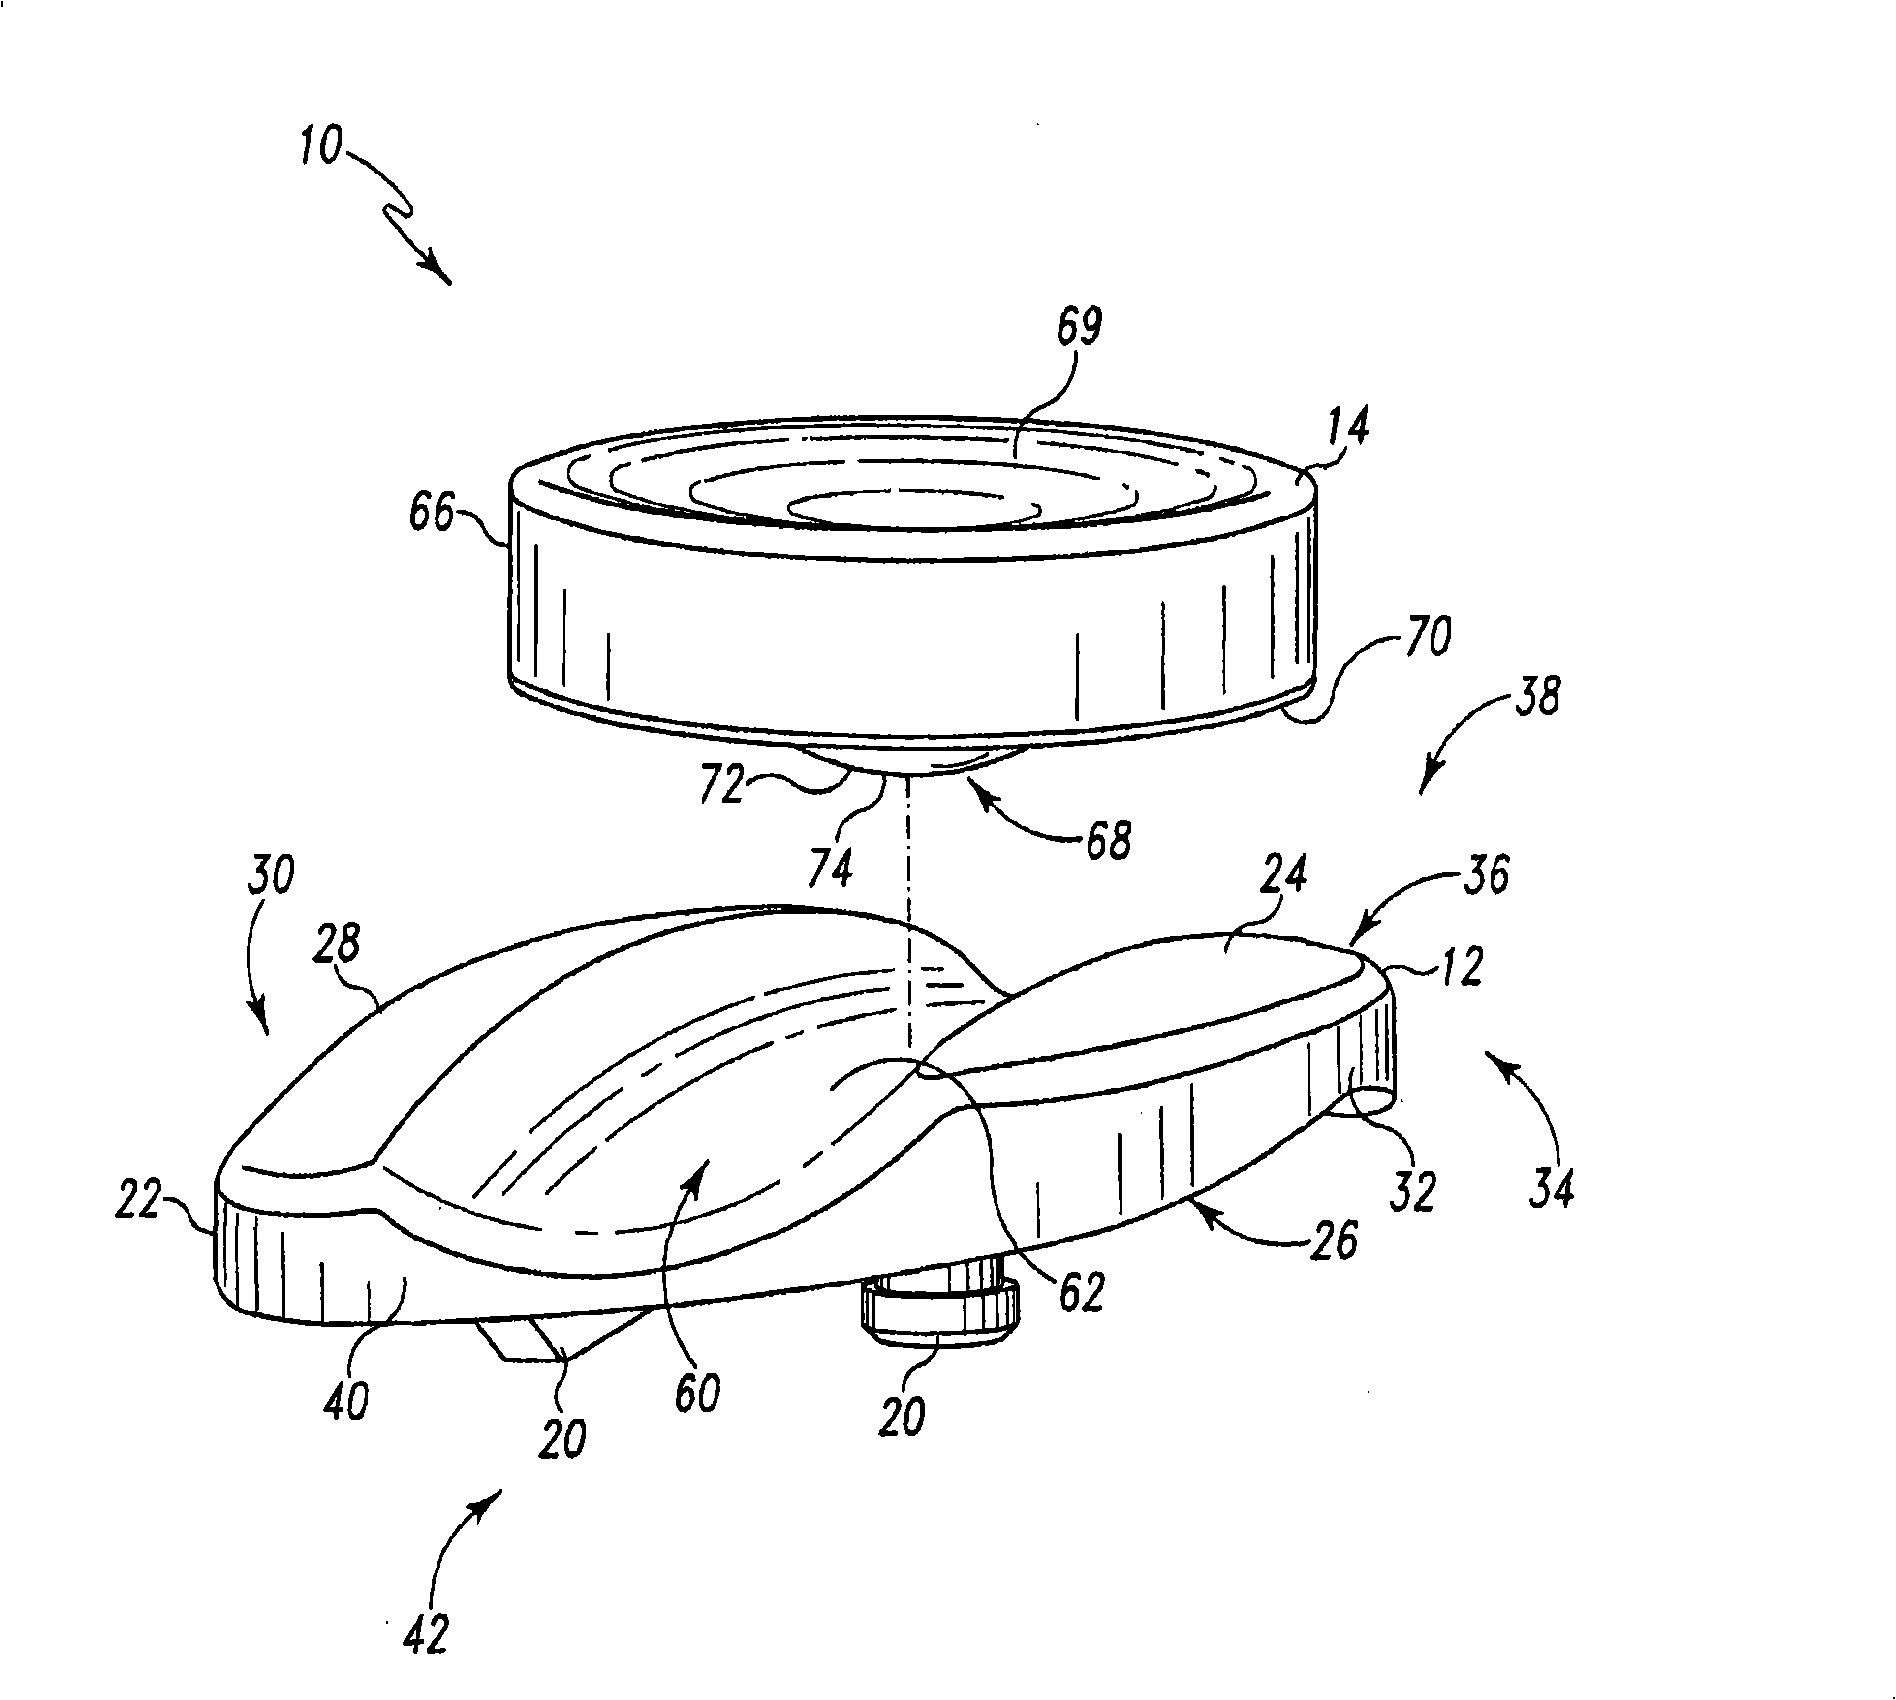 Mobile bearing assembly having a non-planar interface